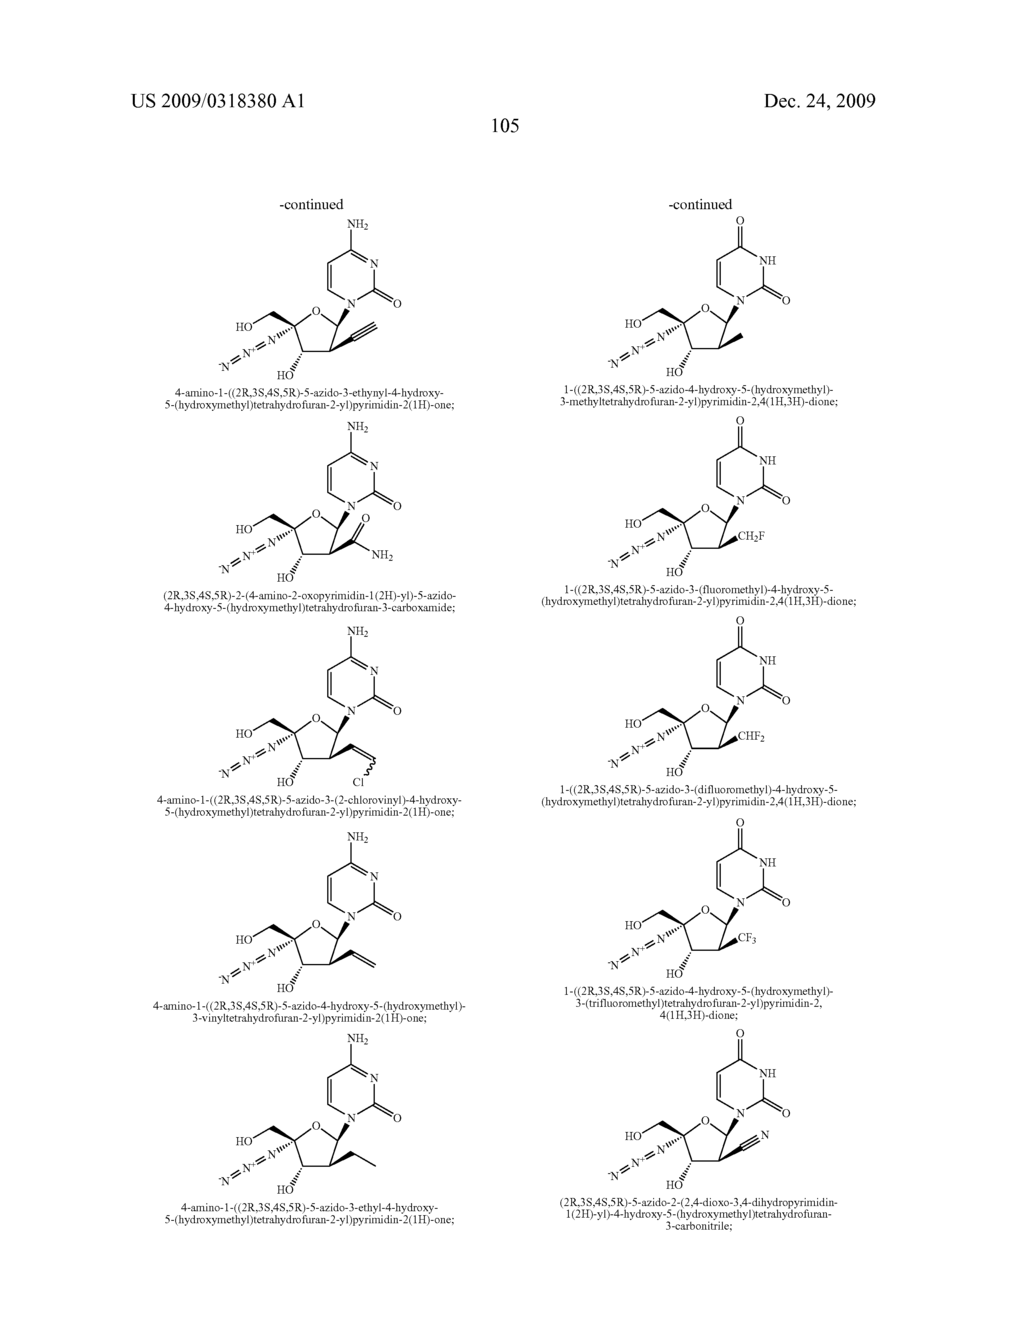 2',4'-SUBSTITUTED NUCLEOSIDES AS ANTIVIRAL AGENTS - diagram, schematic, and image 106